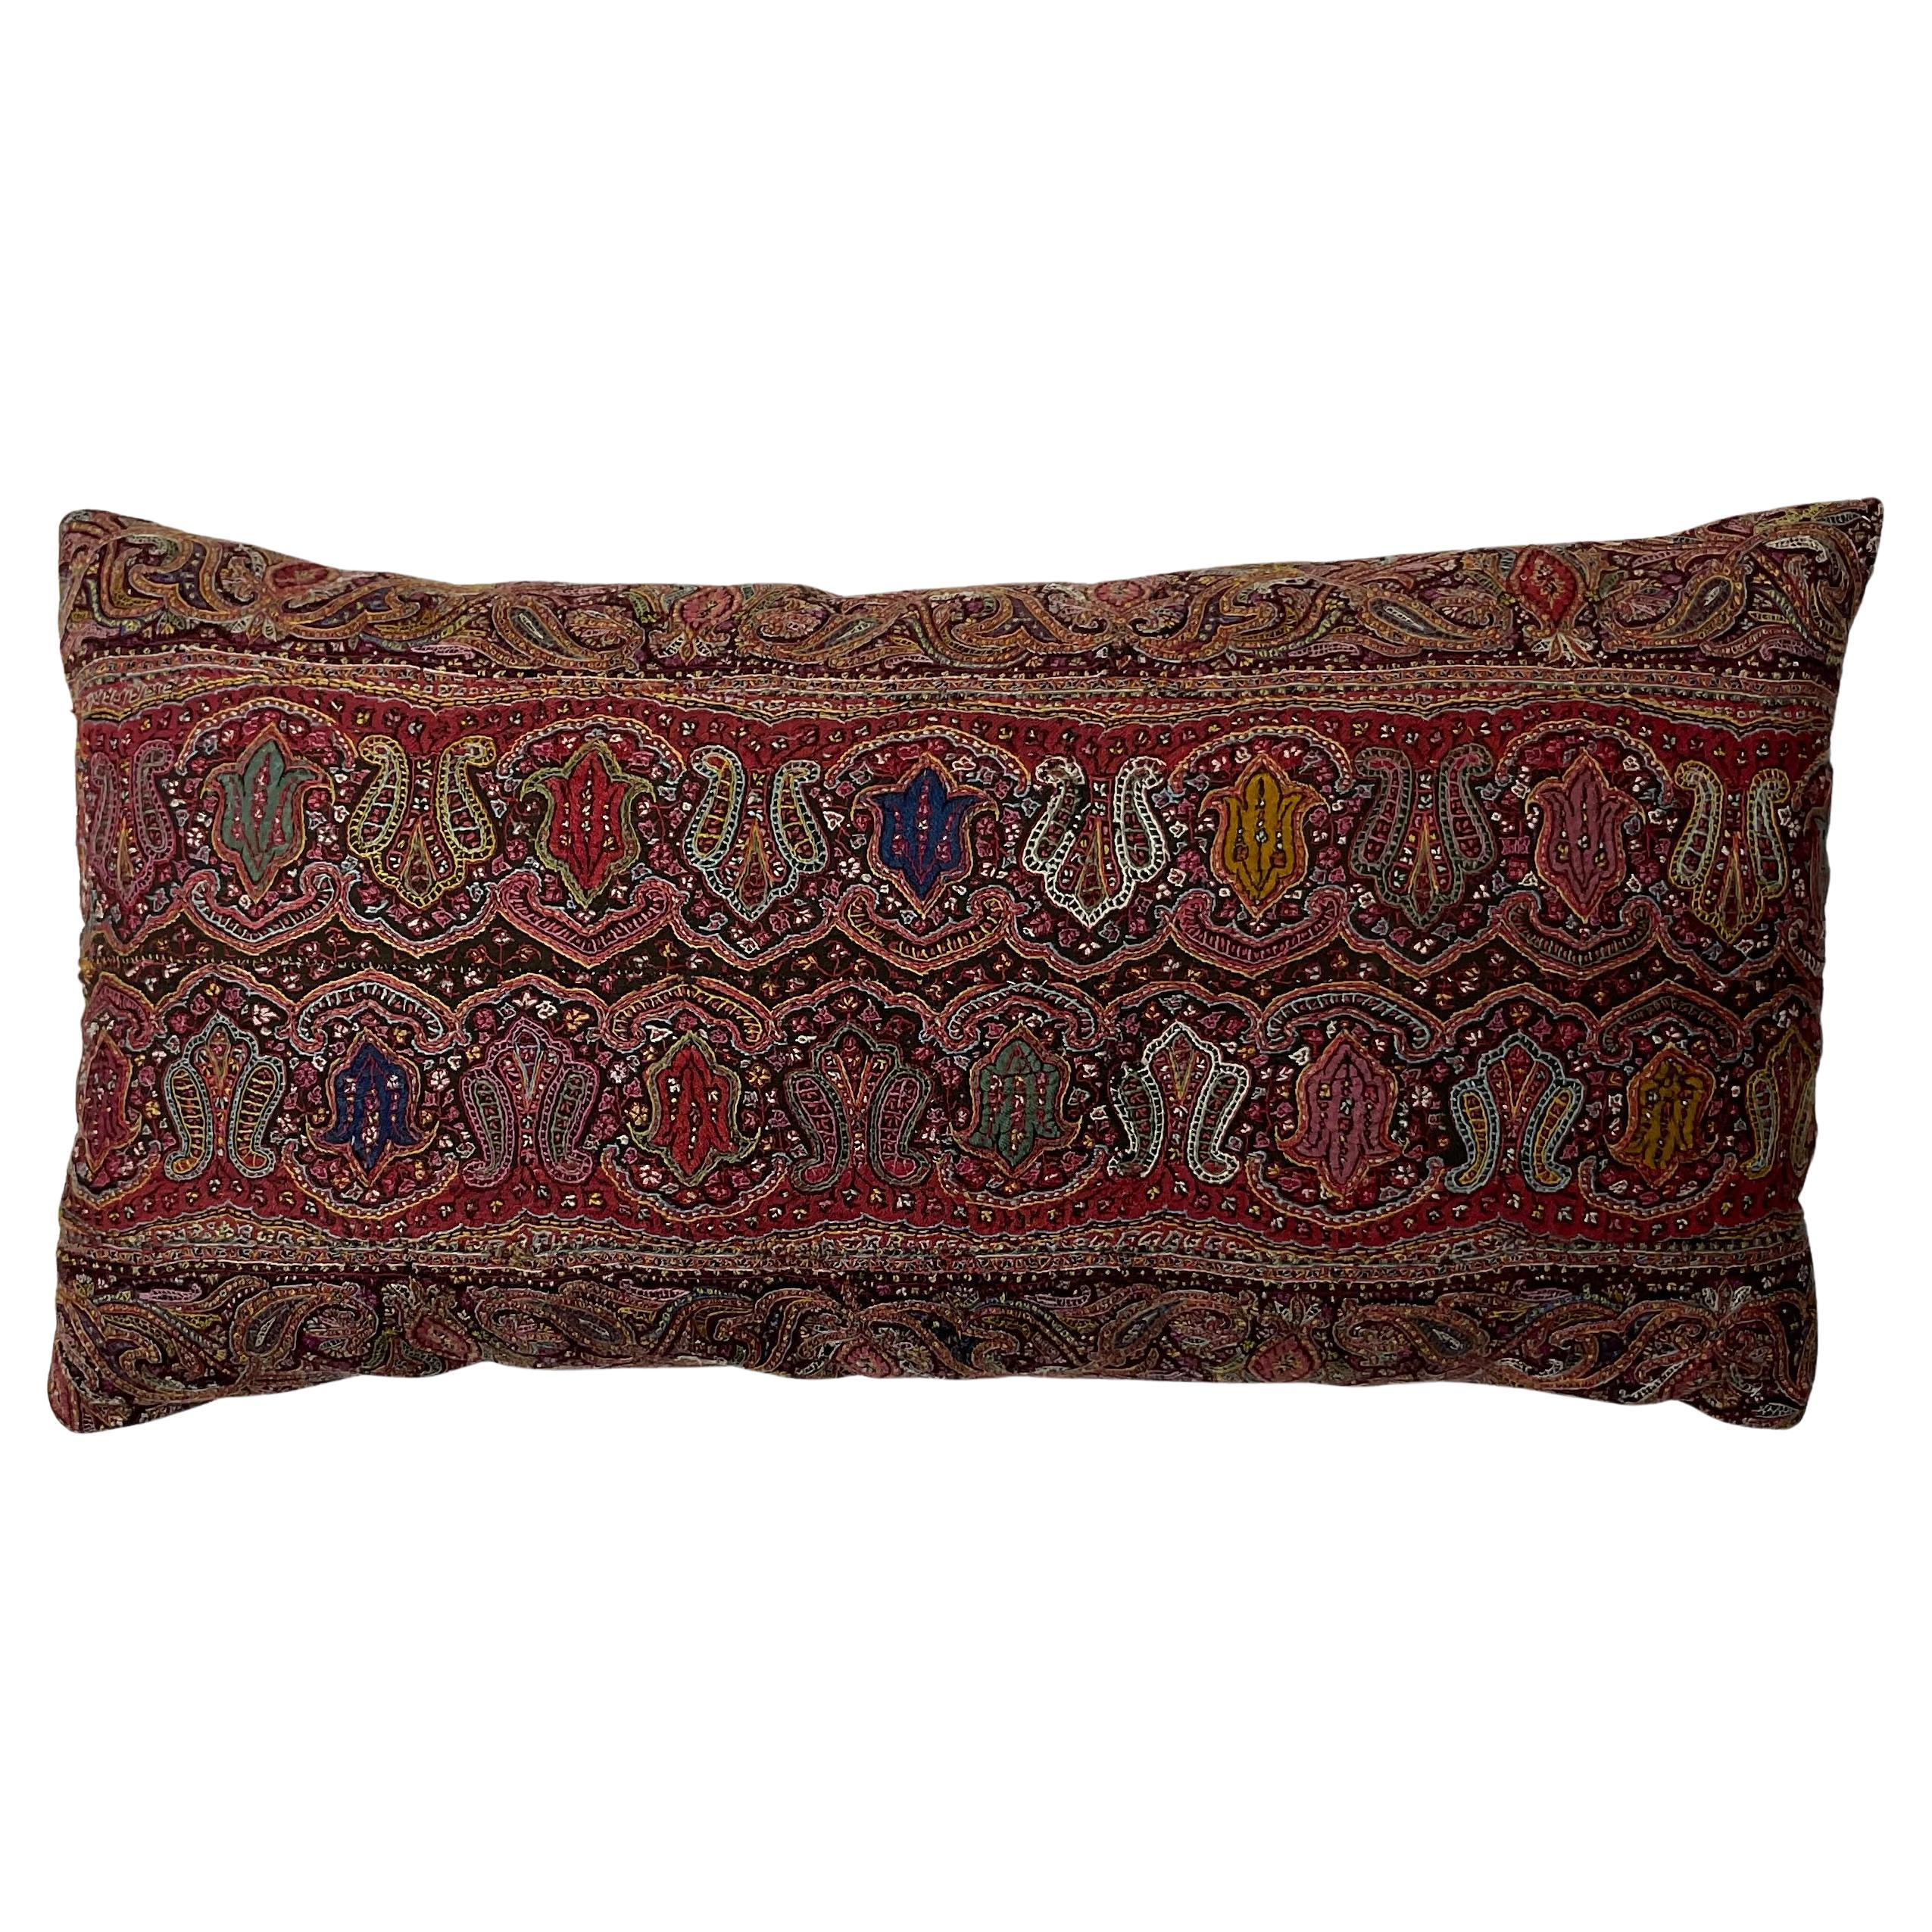 Single Hand Embroidery Persian Suzani Pillow For Sale